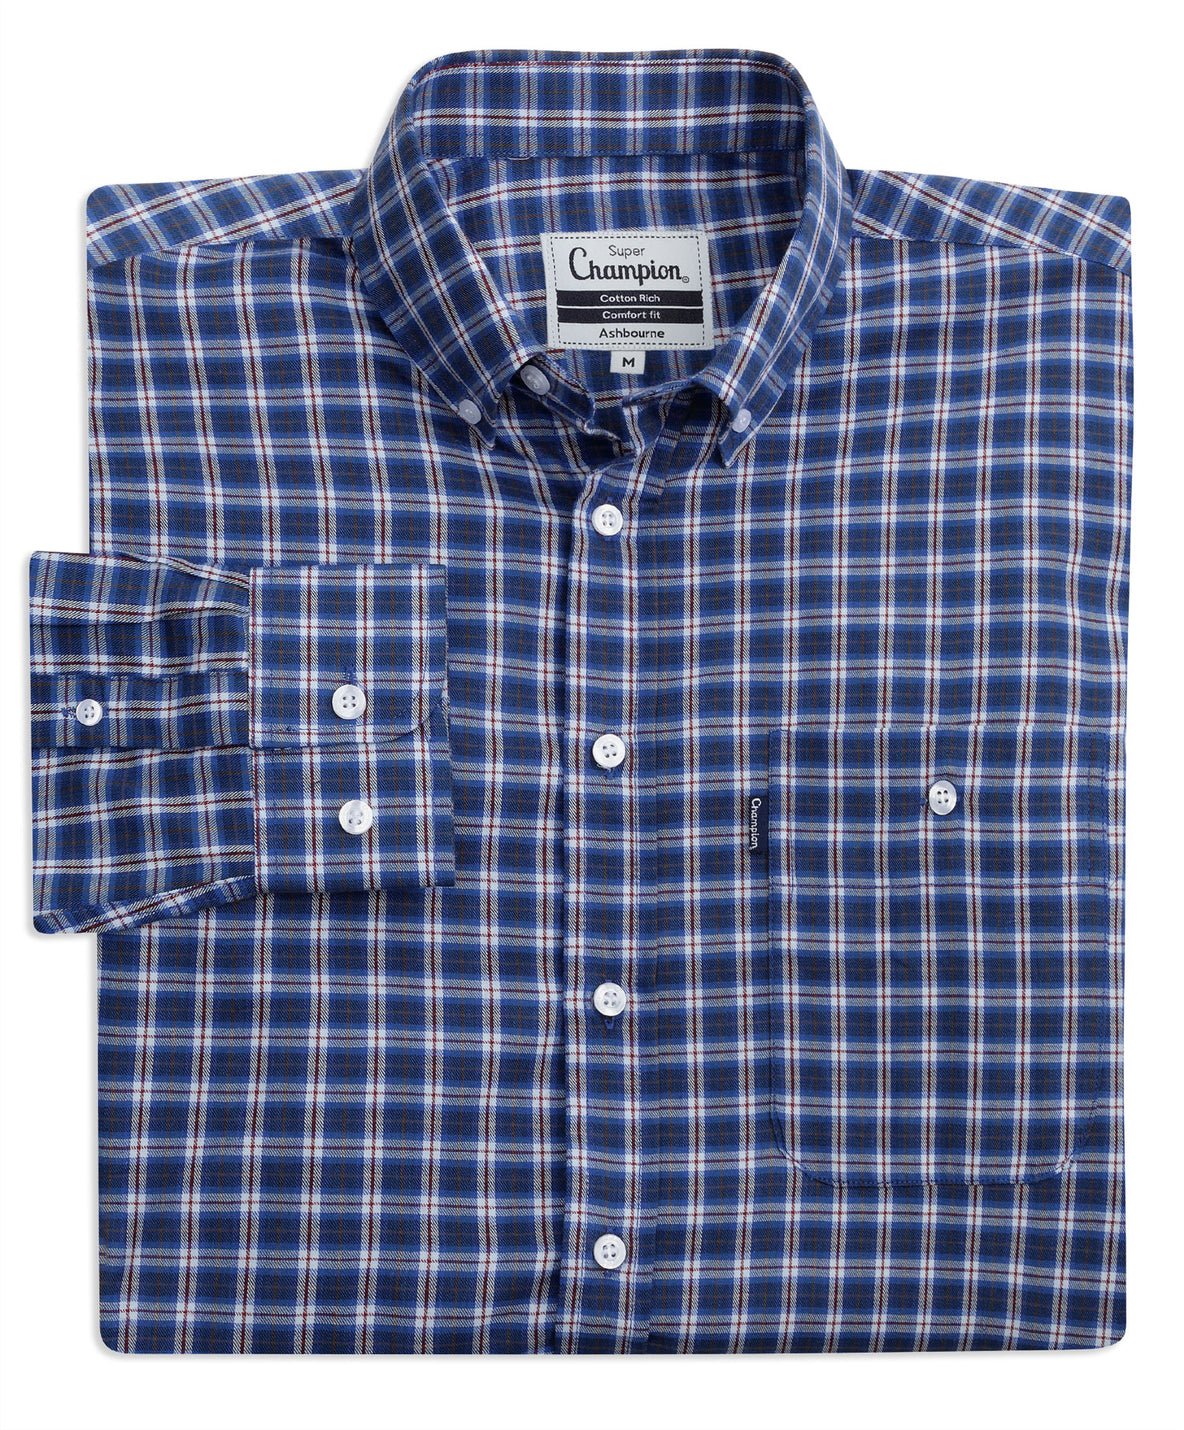 Navy tartan shirt with button down collar from champion outdoor clothing